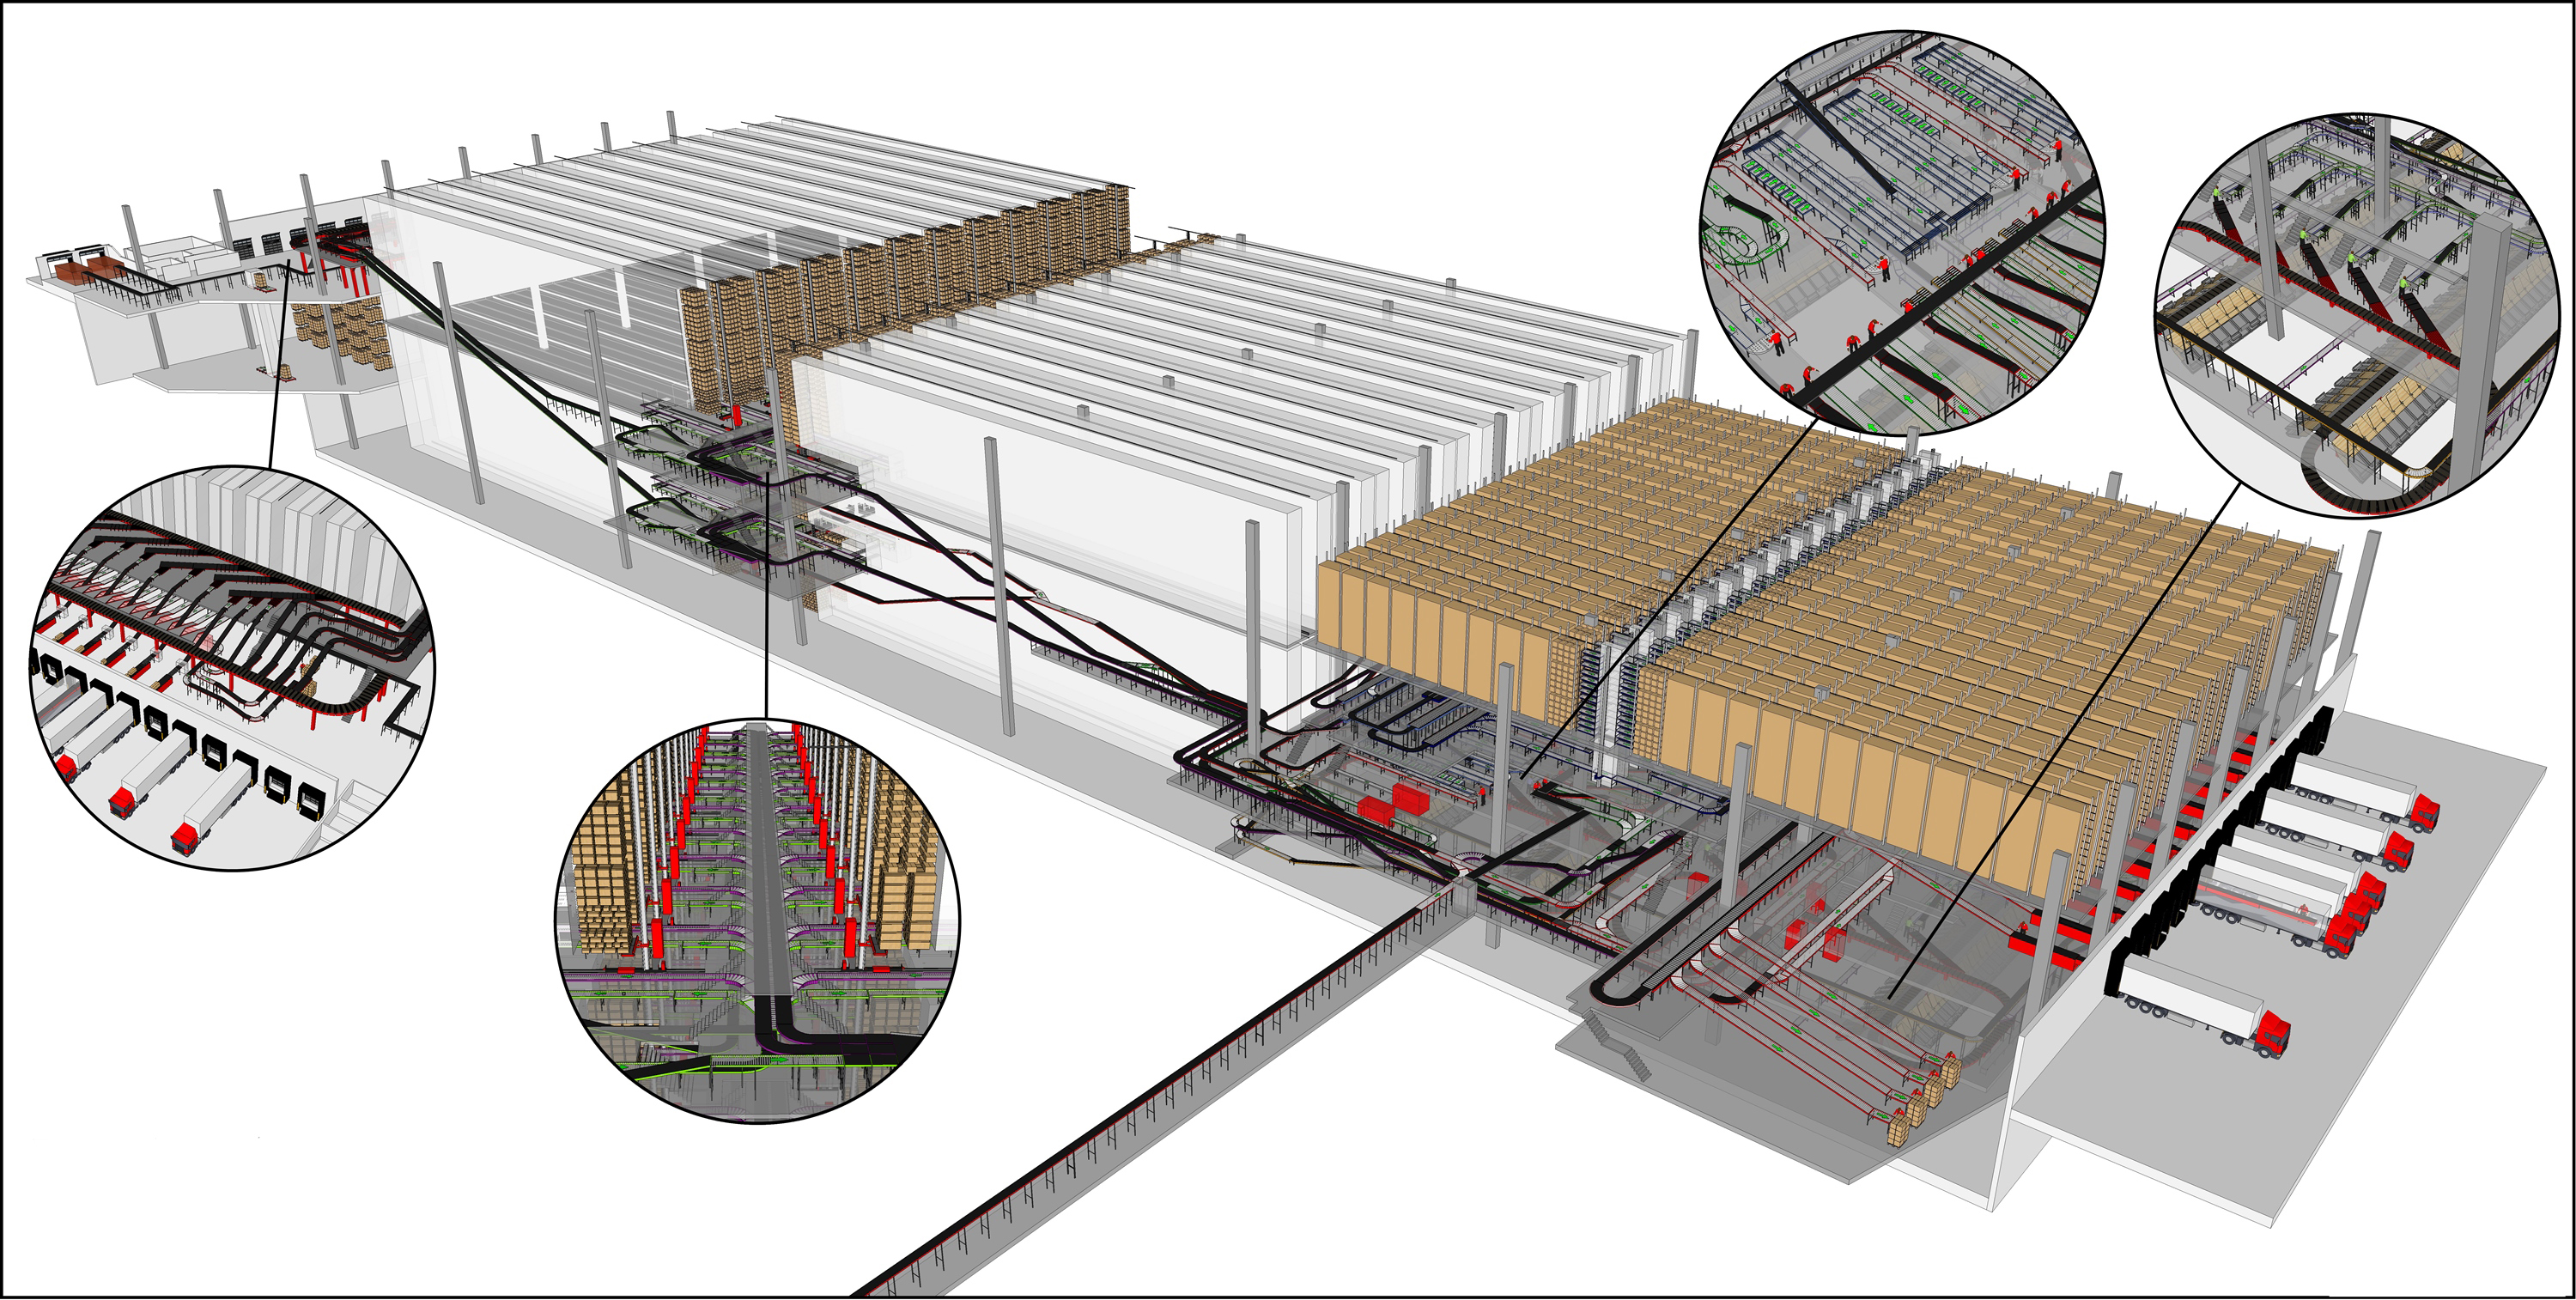 This is a schematic of a conveyor network in a new distribution center for the Mango clothing brand in Spain. Designed by TGW Logistics Group, the conveyors will unify handling of flats that contain preconfigured product assortments and hanging garments to replenish shop supplies. The center will handle nearly 38,000 SKUs.